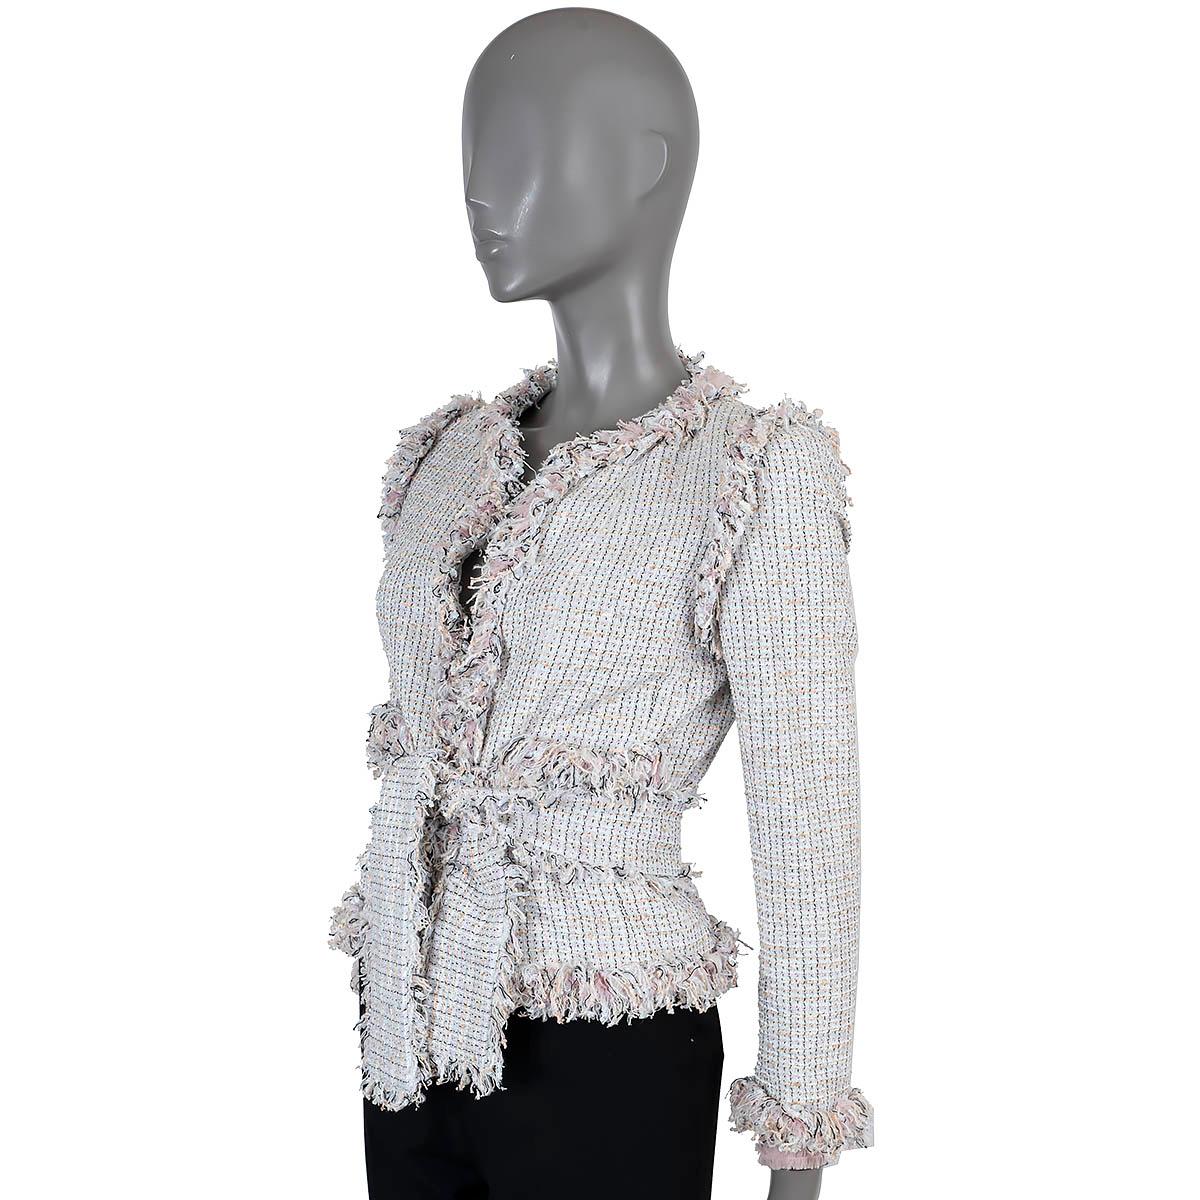 100% authentic Chanel belted tweed jacket in baby blue, beige and pink cotton (55%), polyester (27%) and nylon (18%). Features fringe trim along the seams and cuffs and two open pockets at the waist. Closes with a self-tie belt and is lined in silk